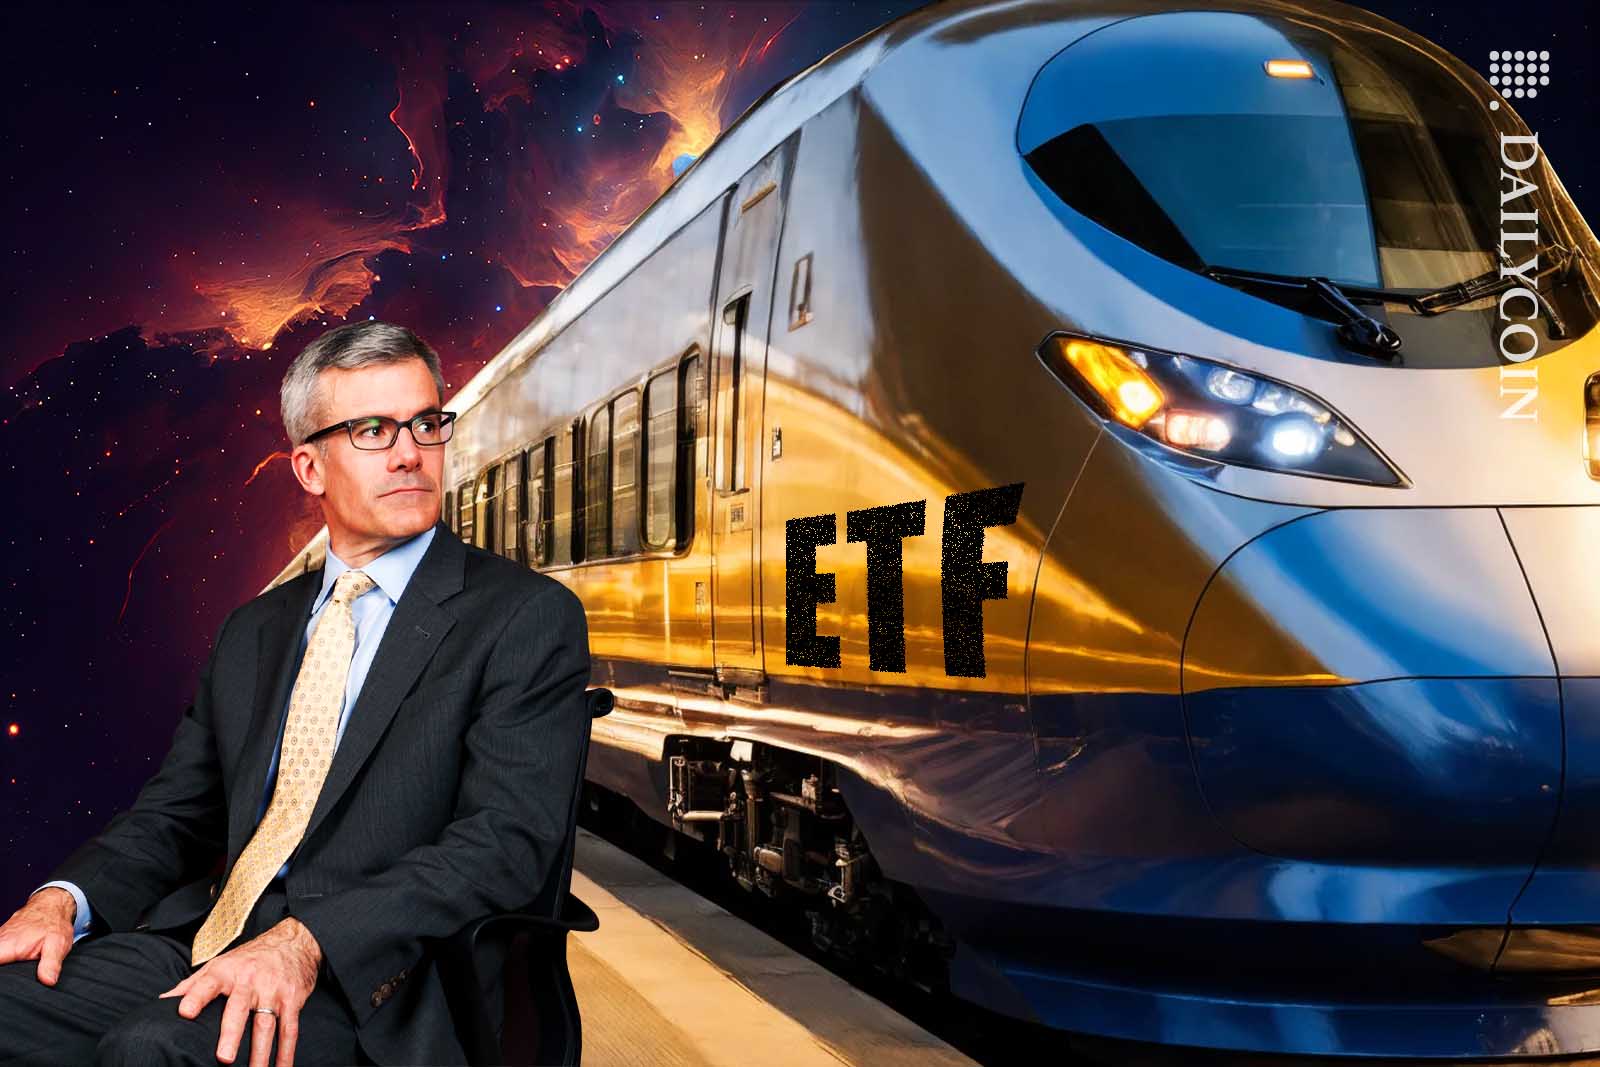 Mortimer Buckley of Vanguard turning his back to a golden ETF train.